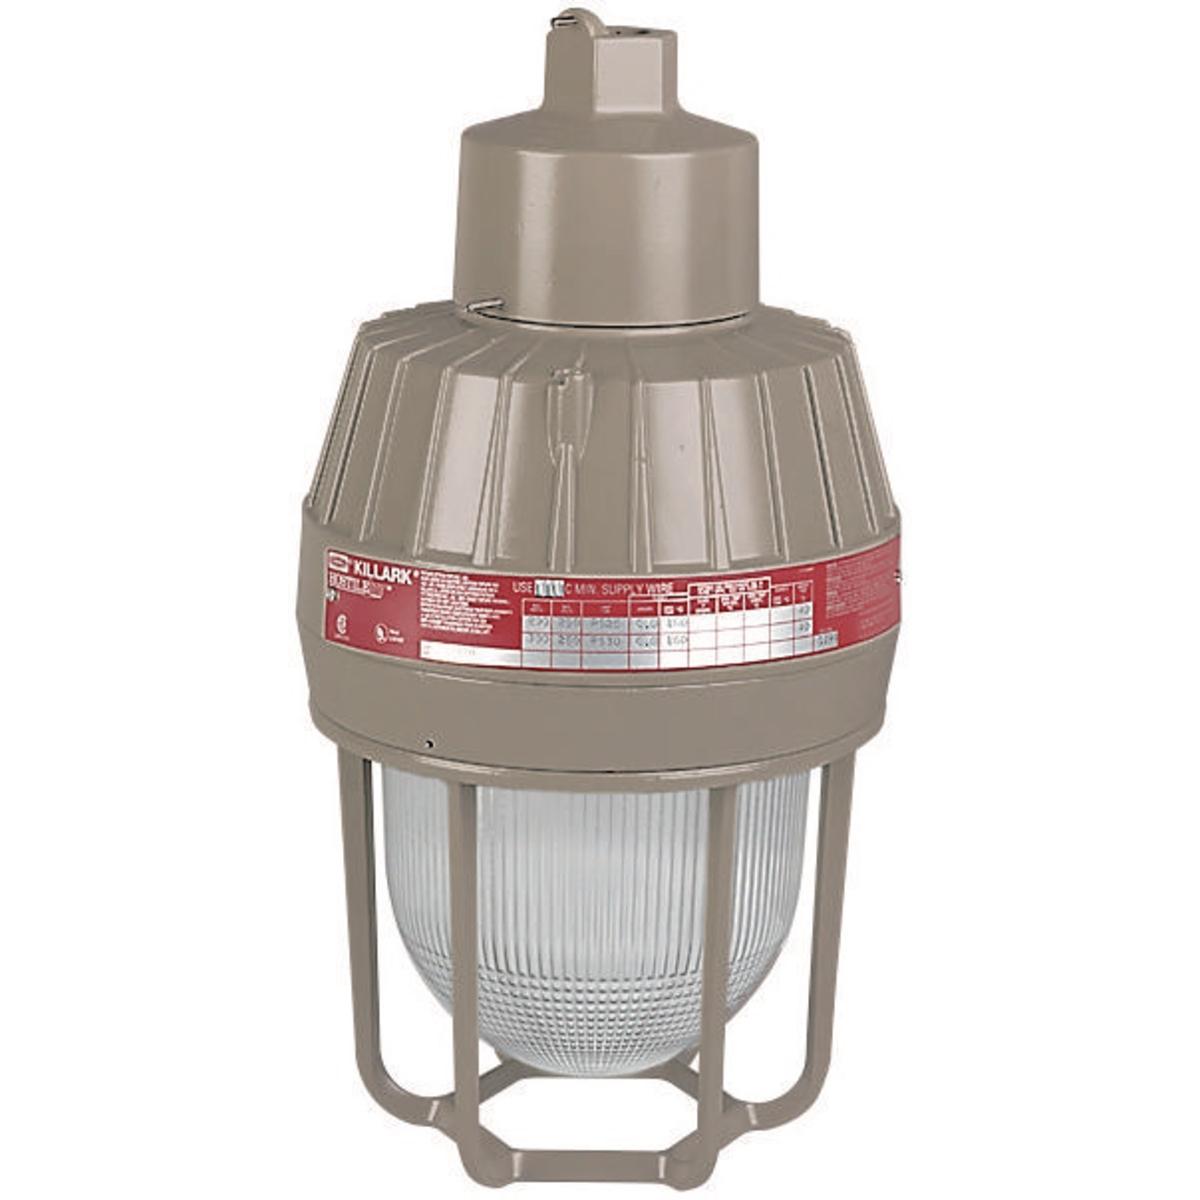 Hubbell EMS151B2GDATSU103 HID 150W 120V HPS - 3/4" Wall Mount with Dual Arc Lamp - Assembled with Lamp  ; Four light sources—Incandescent, compact fluorescent, high pressure sodium and metal halide ; Mounting choice—Pendant, ceiling, 25˚ stanchion or 90˚ wall mount, all with “wire